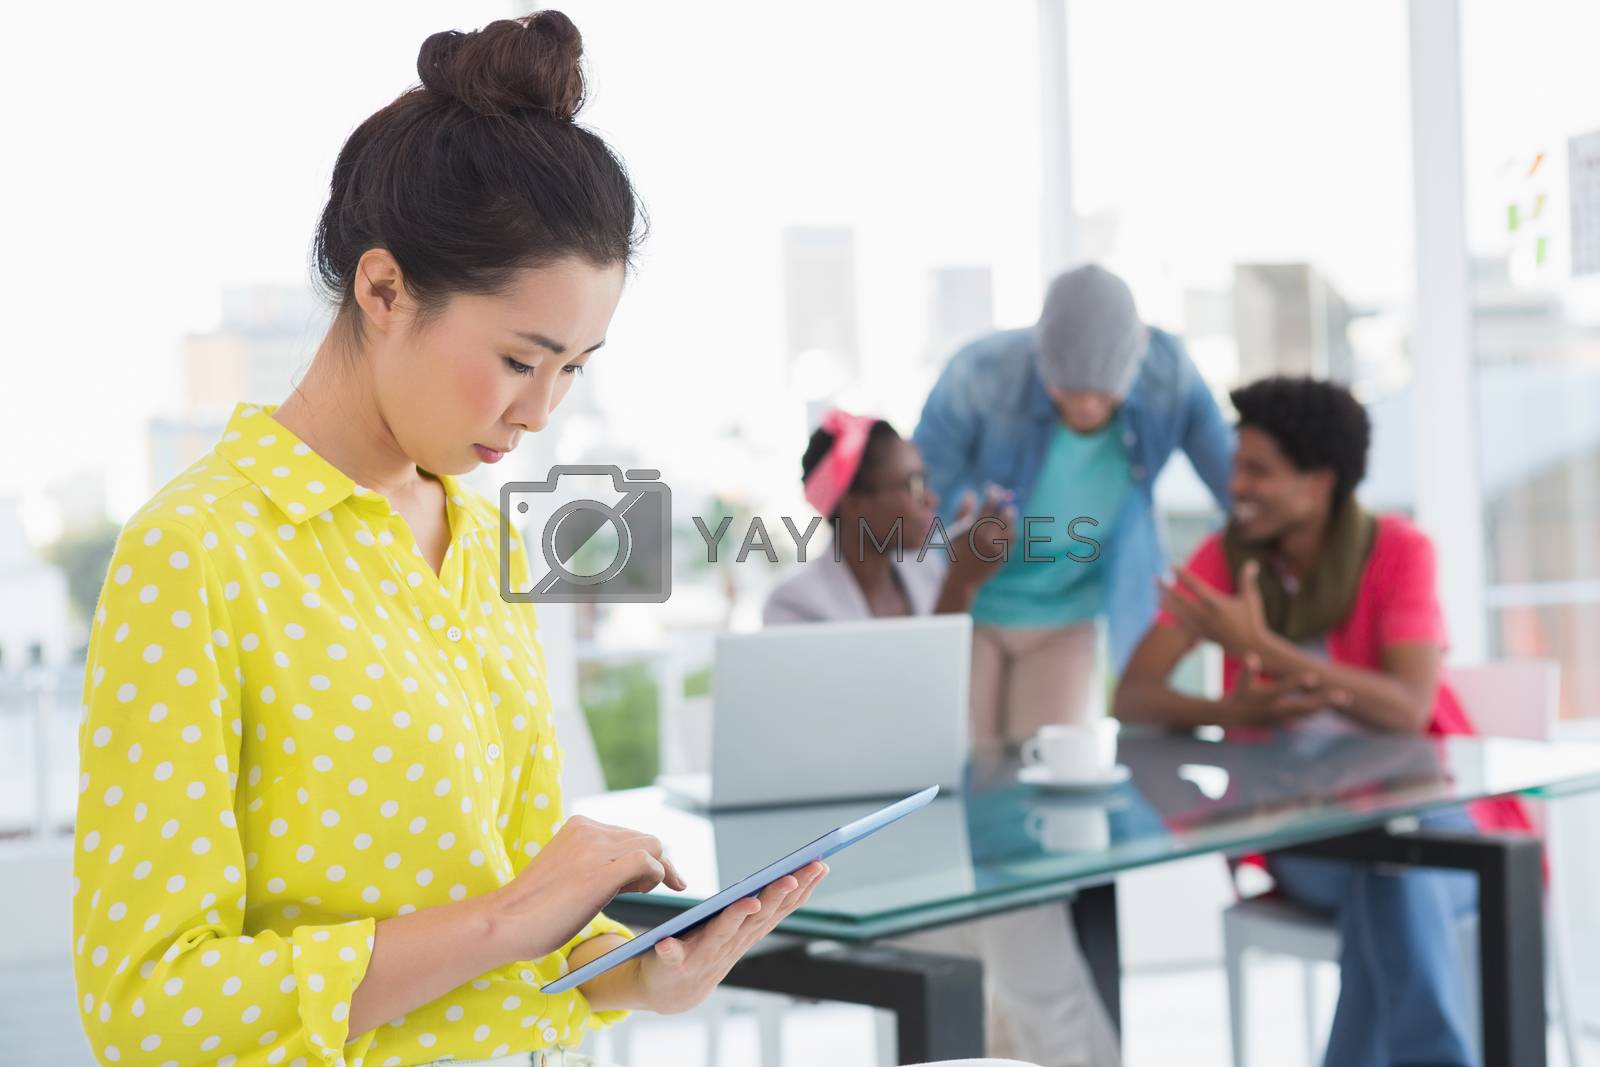 Royalty free image of Young creative woman using her tablet by Wavebreakmedia